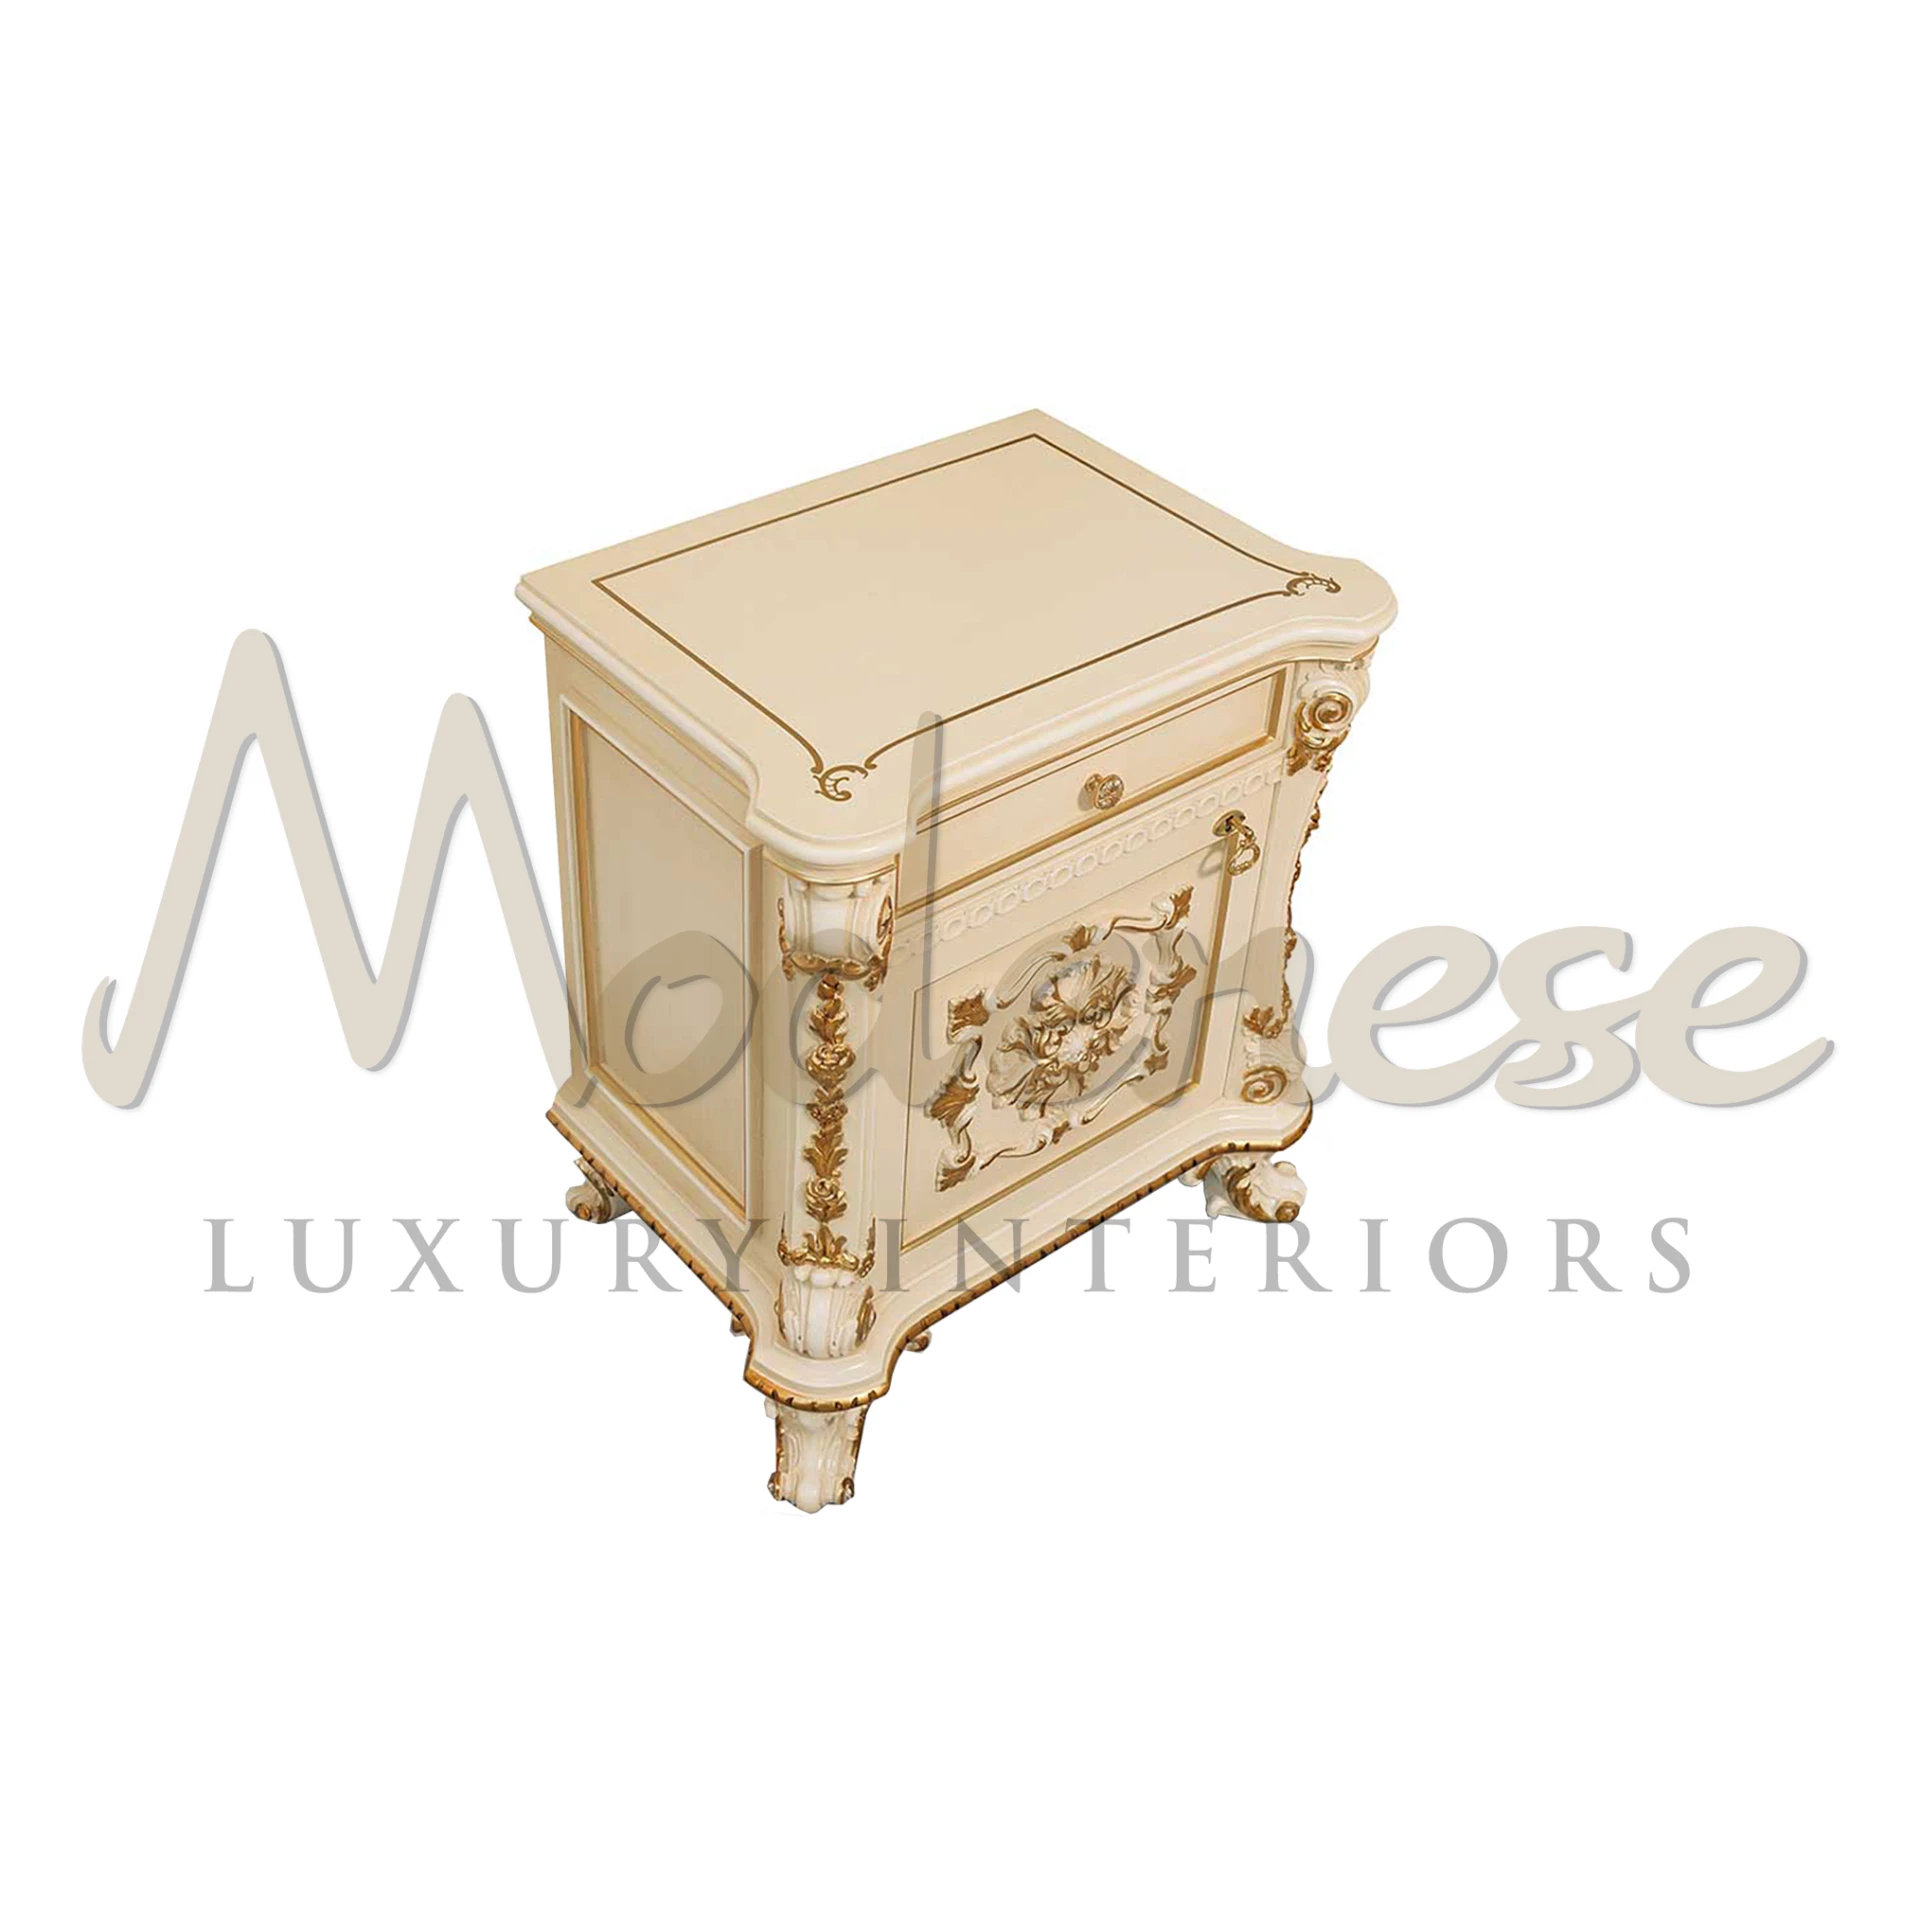 Elegant cream-colored nightstand with intricate gold detailing and sculpted legs, featuring a floral motif made by Modenese Furniture Manufacturer in Italy.